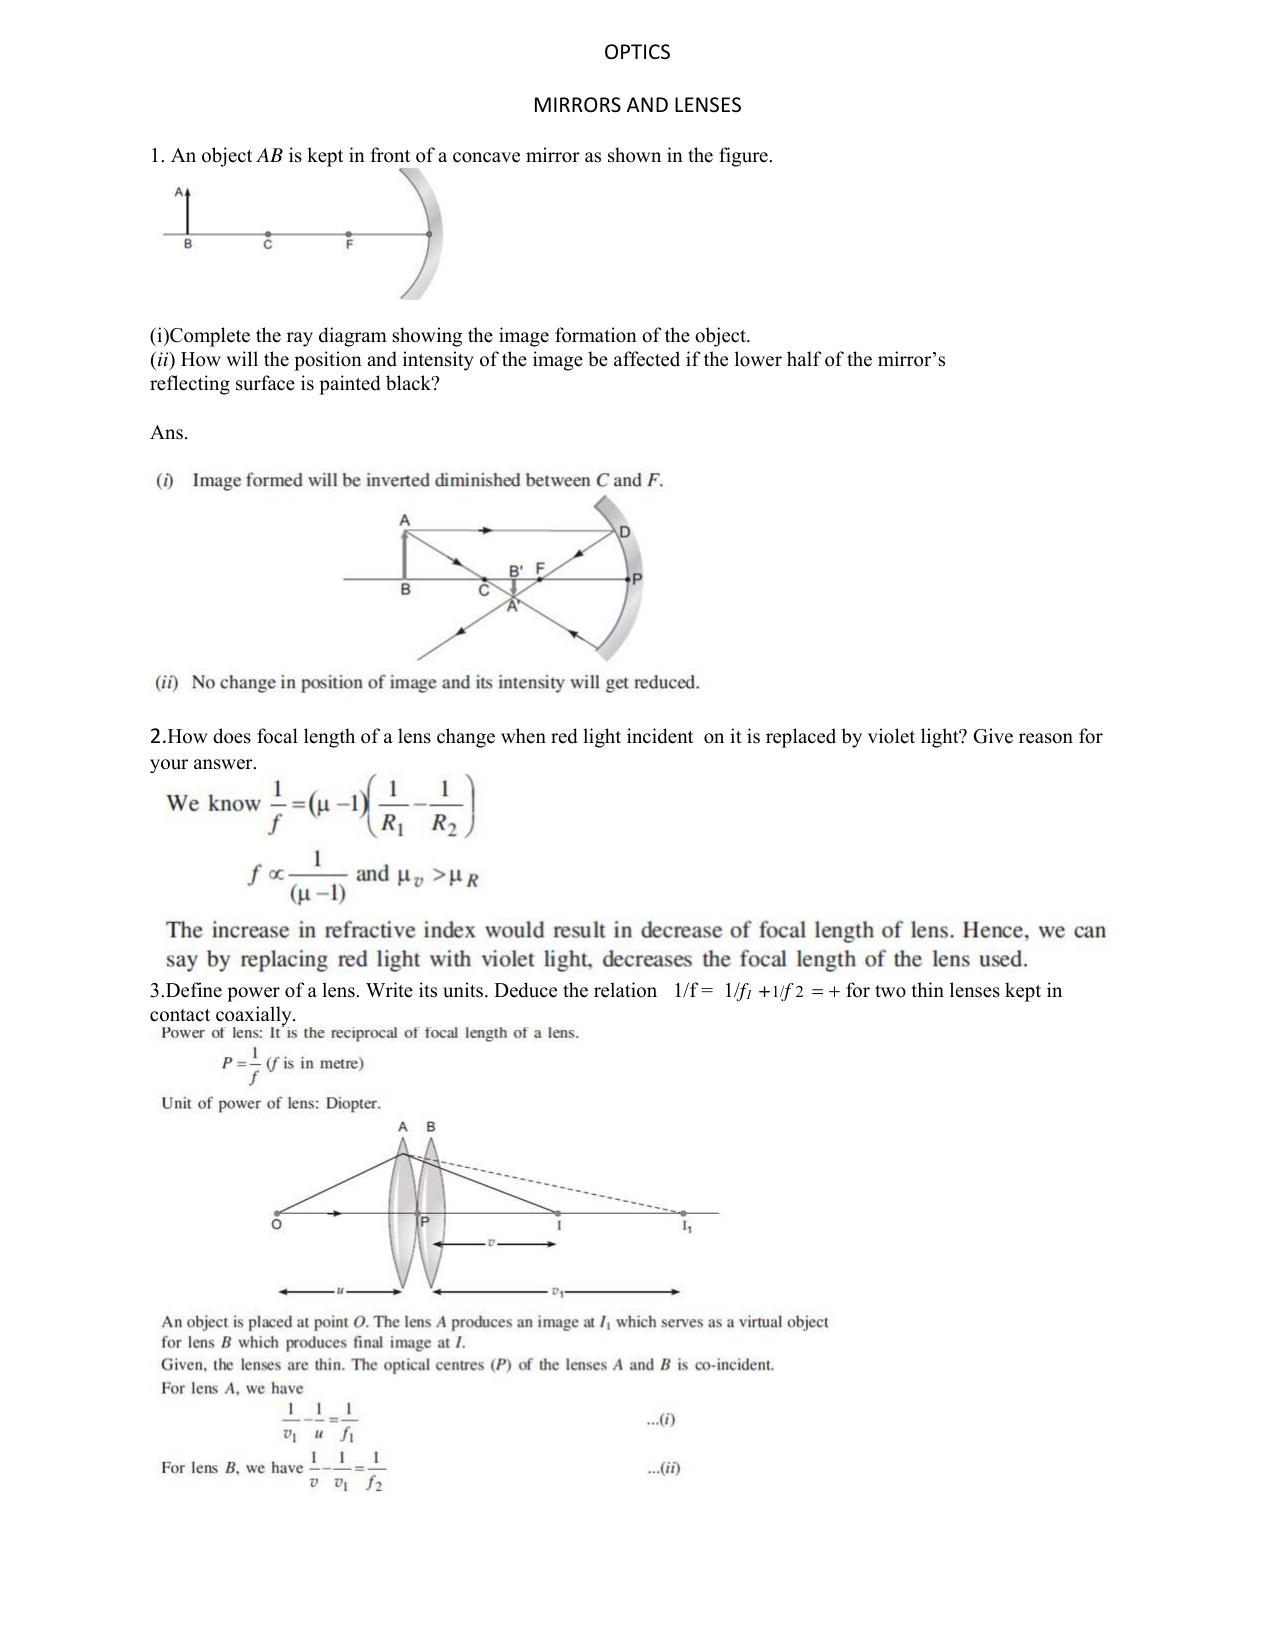 CBSE Class 12 Physics Worksheets for Optics - Page 1